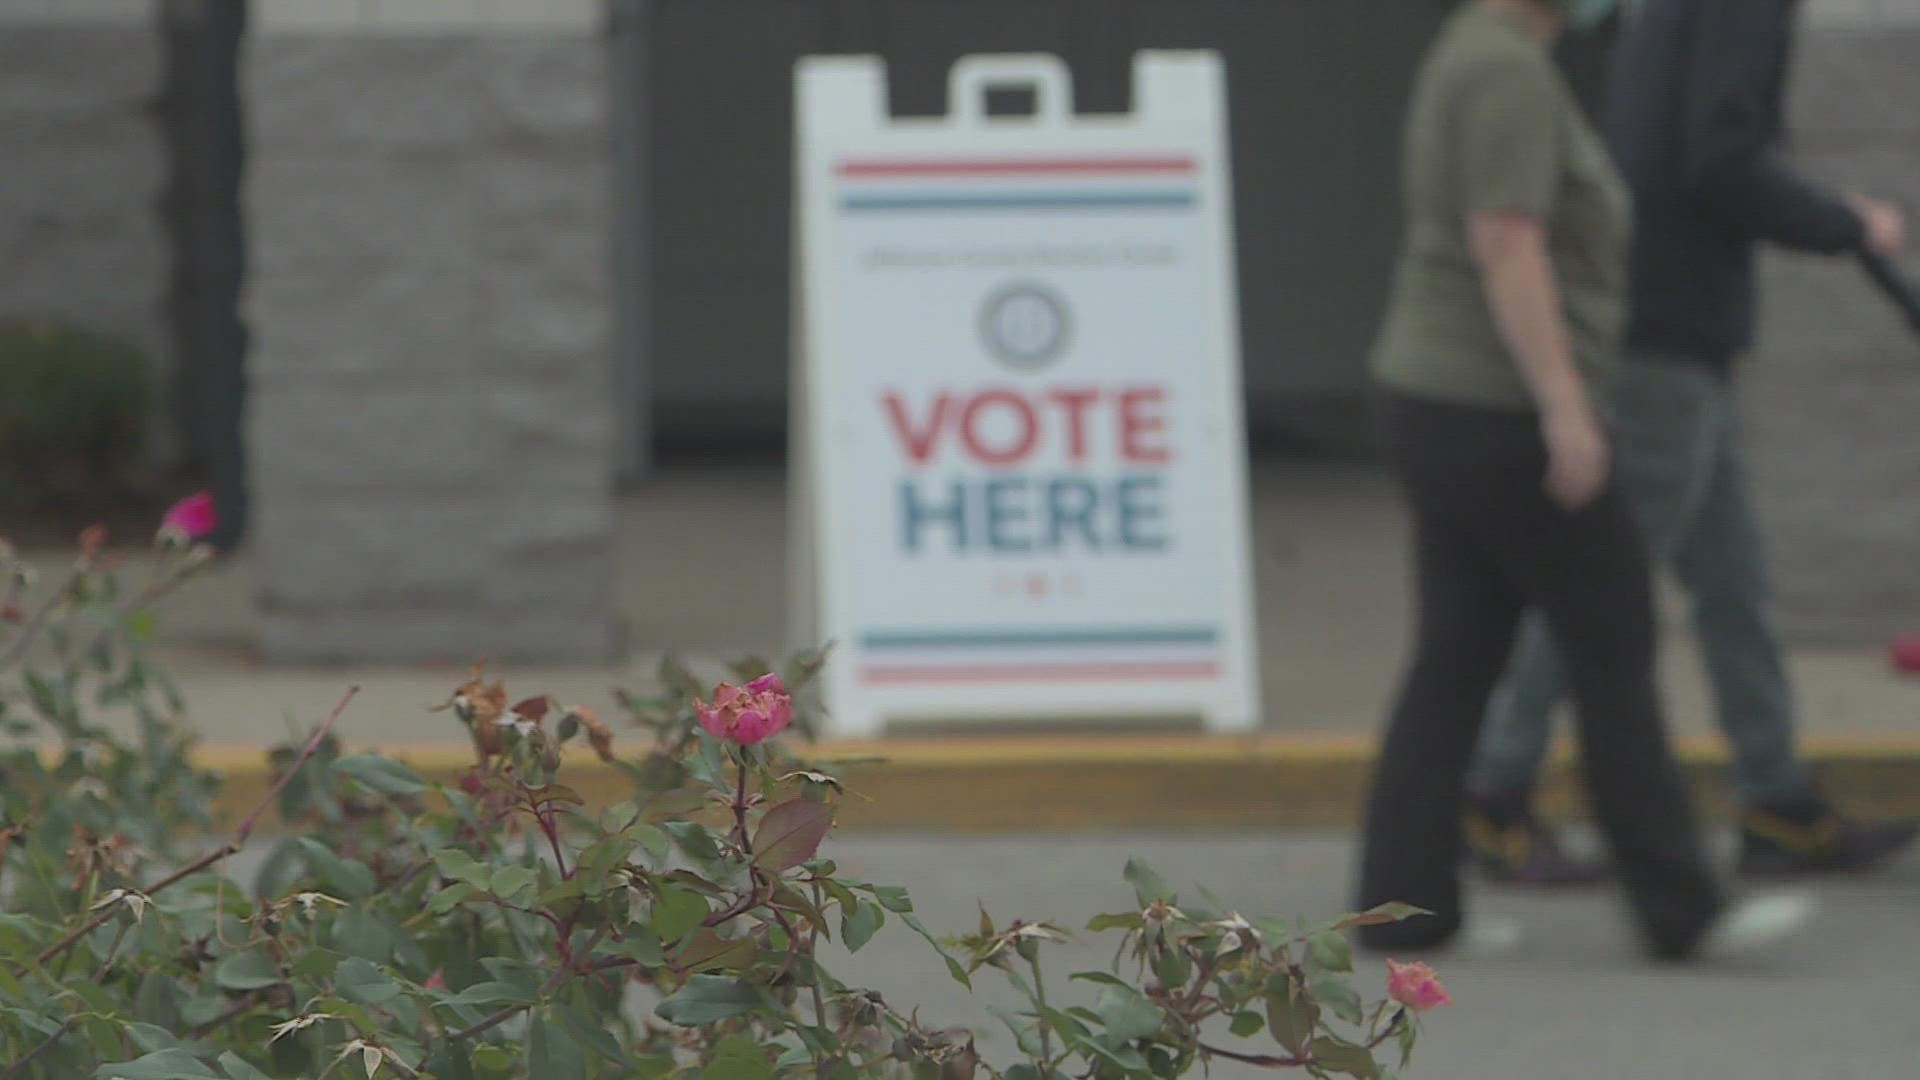 From candidates making last-ditch efforts to people simply exercising their most basic right, here's how the final day of early voting went in Jefferson County.